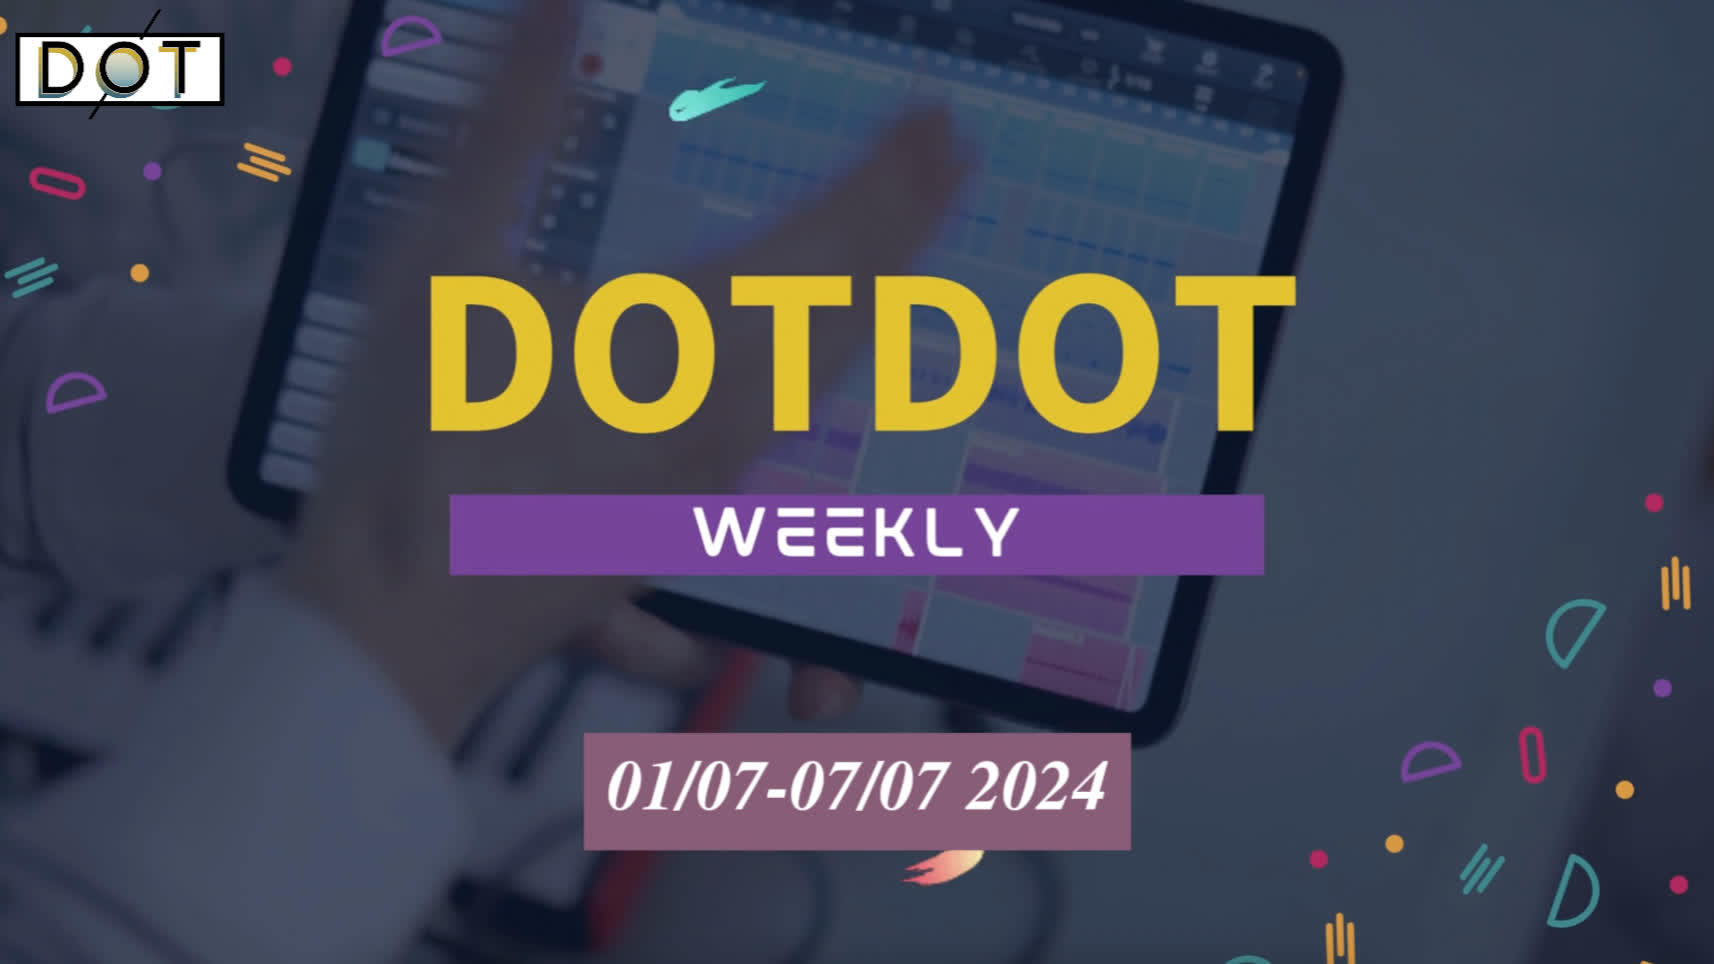 DotDotWeekly | Non-Chinese permanent residents of HK and Macao can apply for Mainland Travel Permit starting from July 10